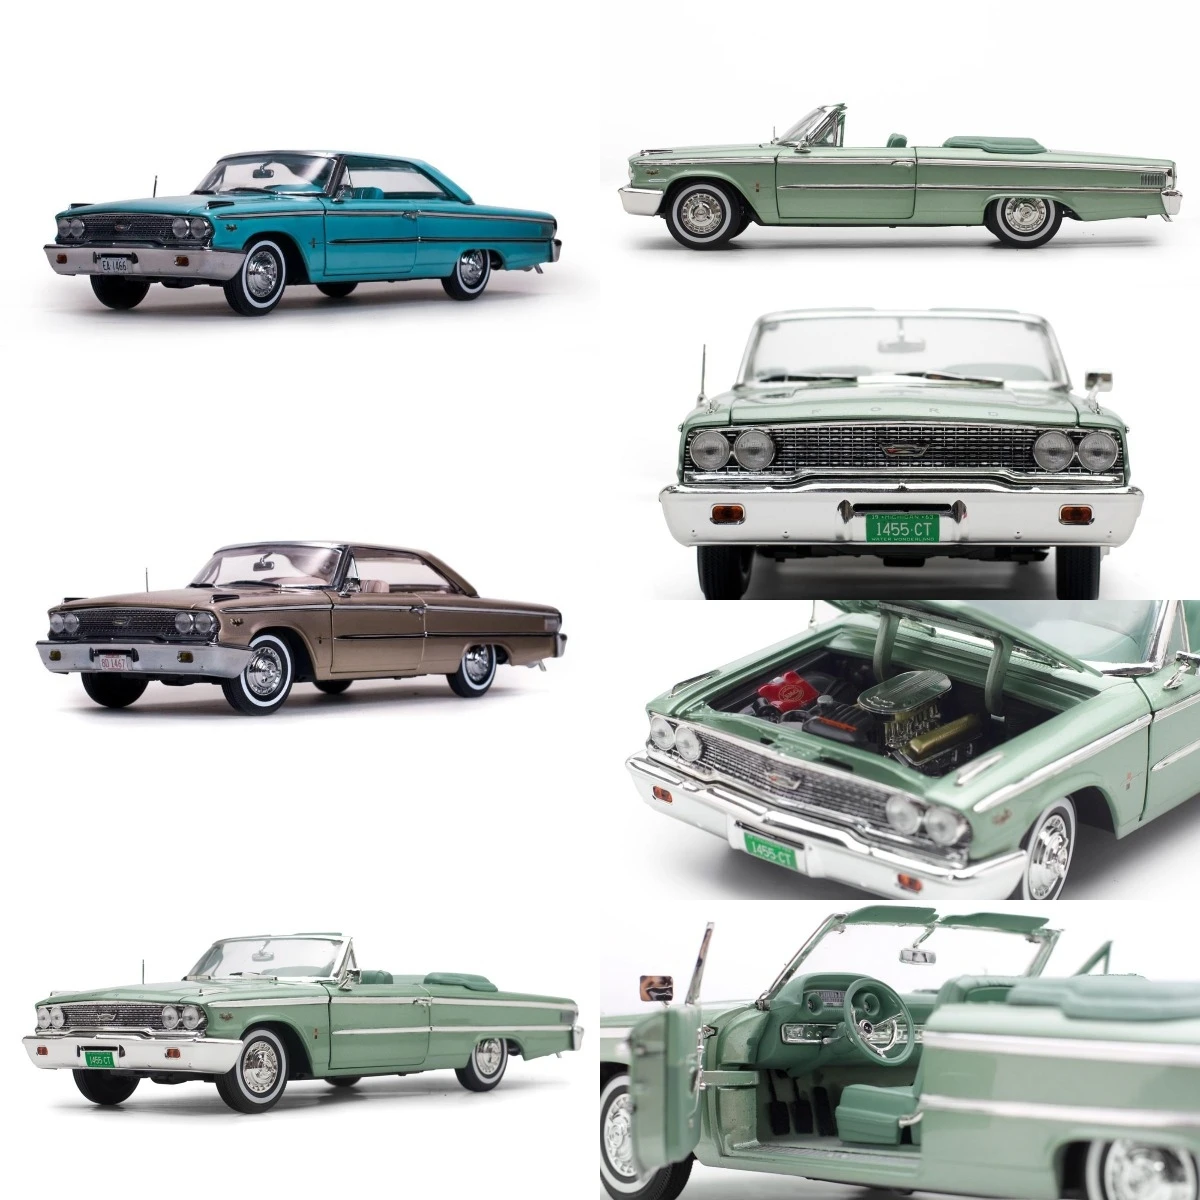 

SunStar 1:18 For Galaxie 500 XL Hardtop 1963 Classic Cars Alloy Full Open Limited Edition Metal Model Ornament Toy Gift